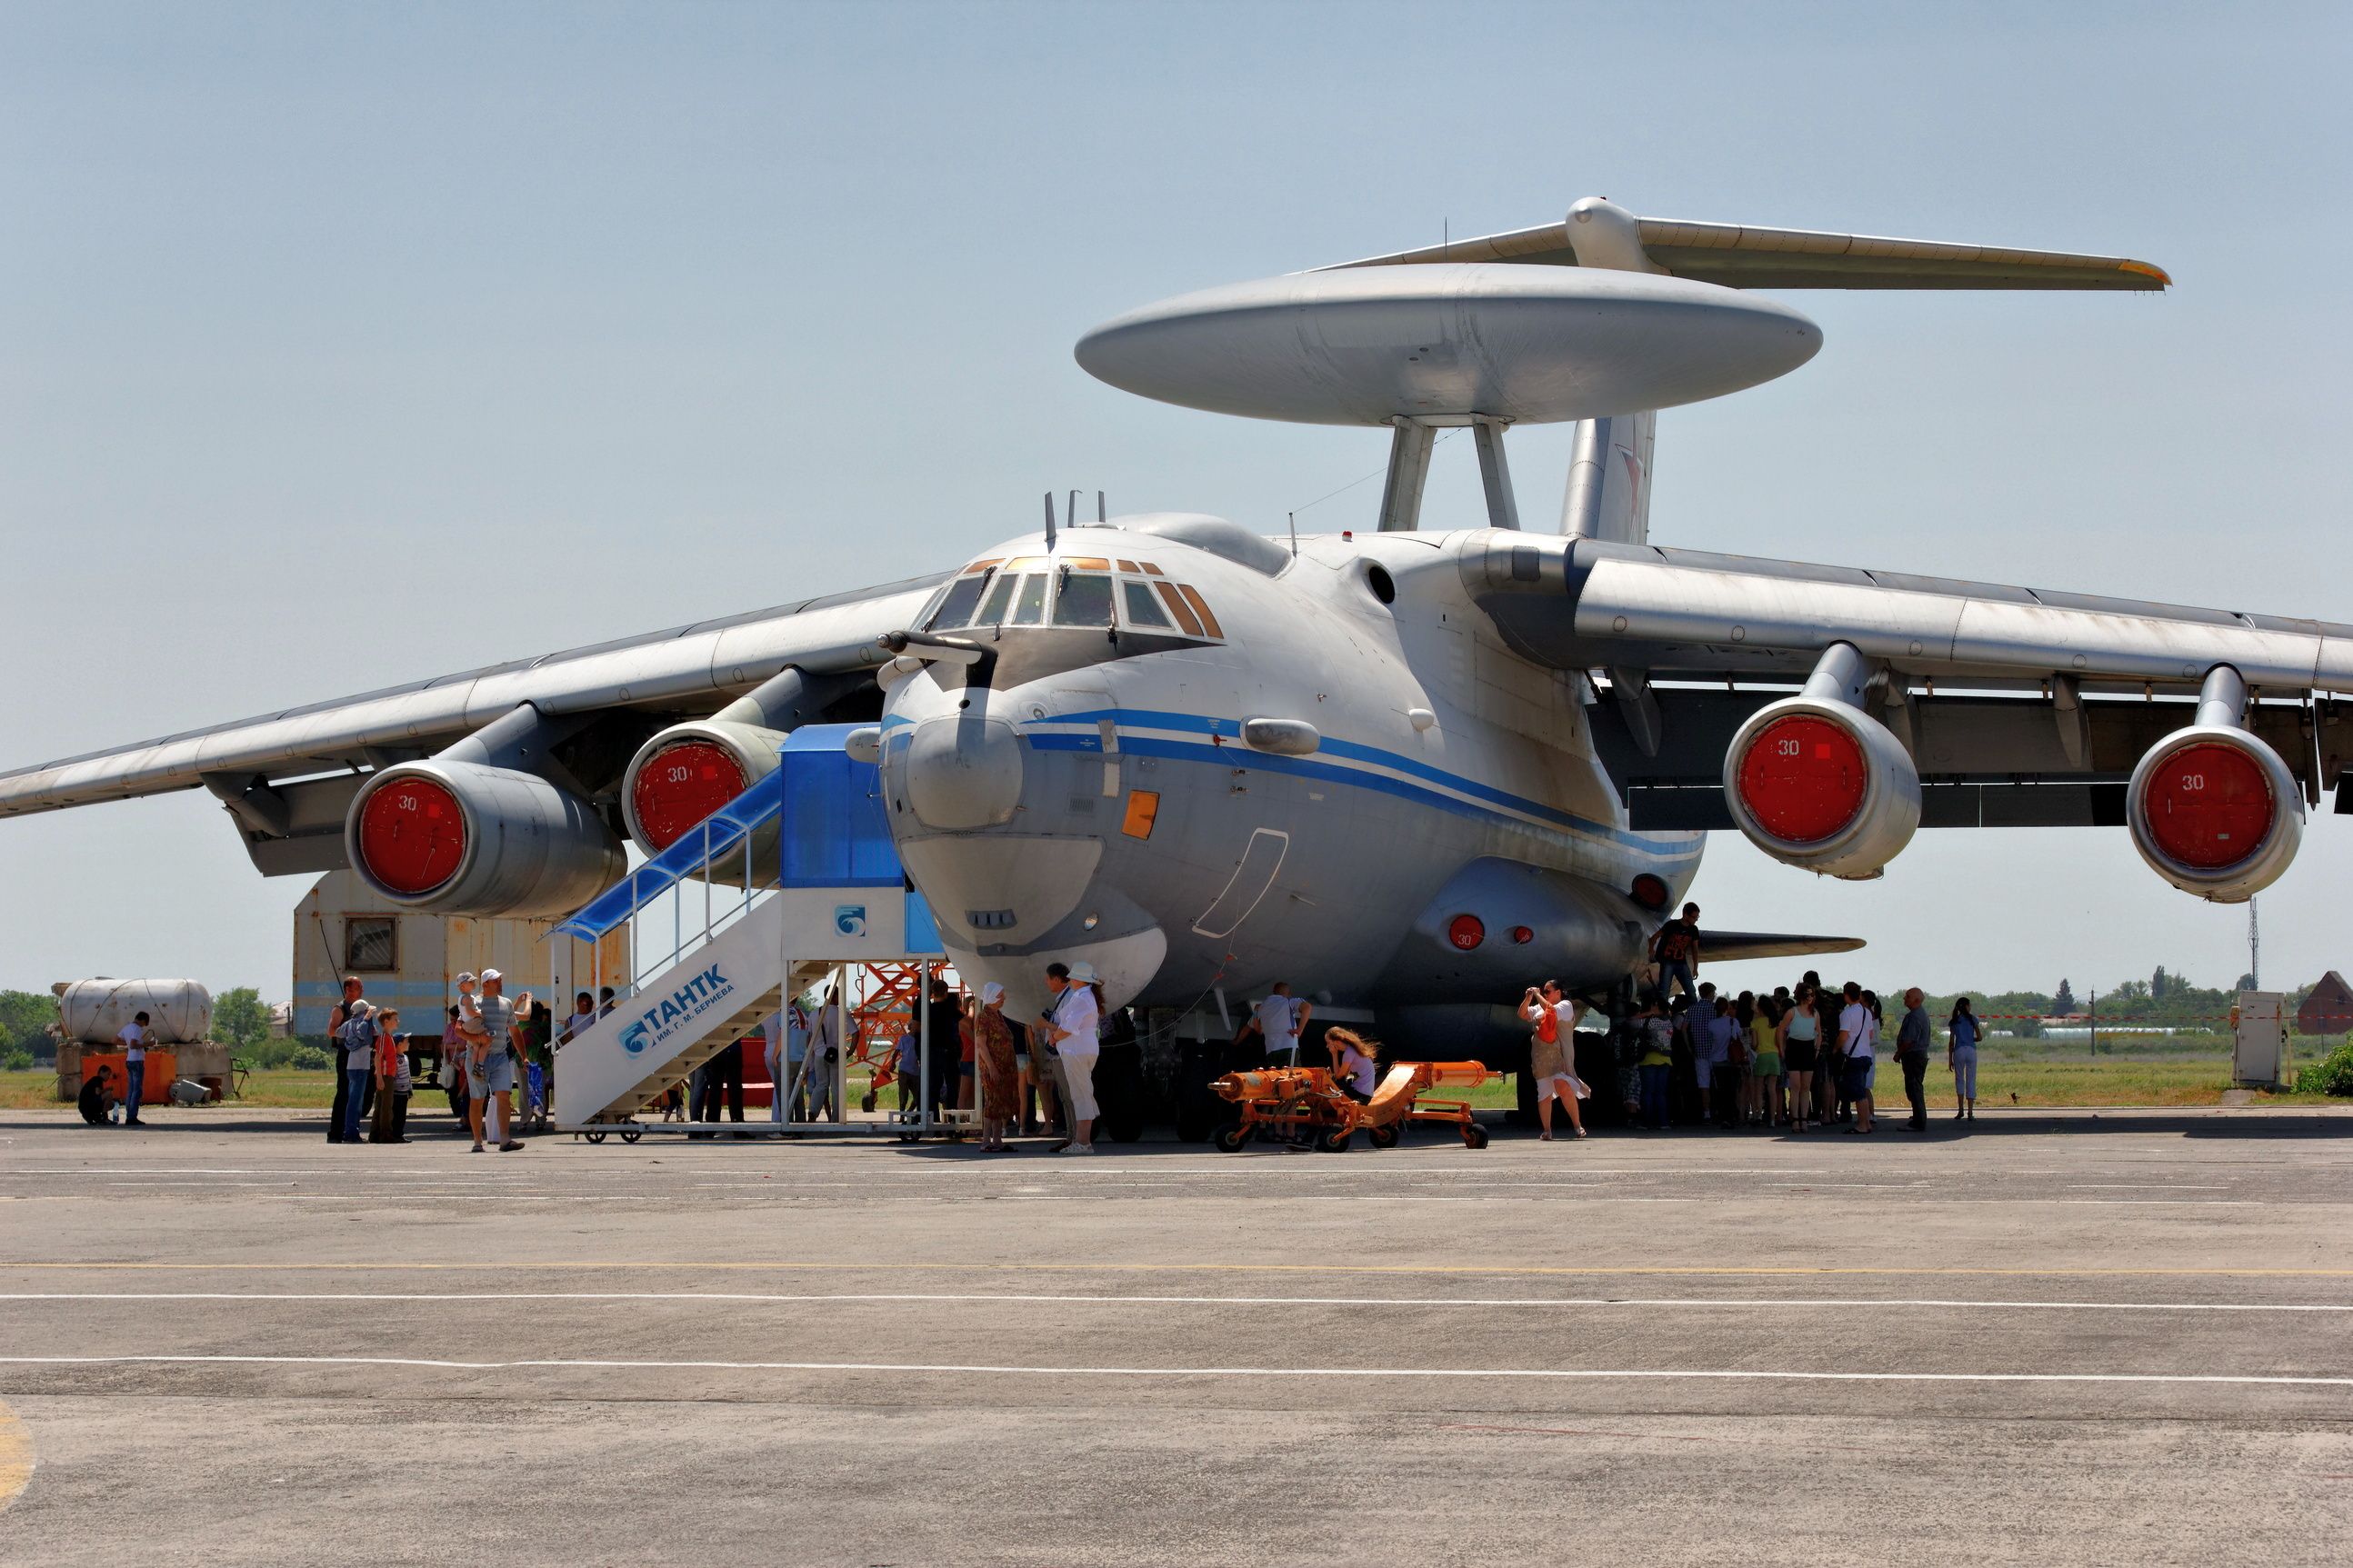 A Beriev A-50 aircraft parked at an airfield, with many visitors taking photos.